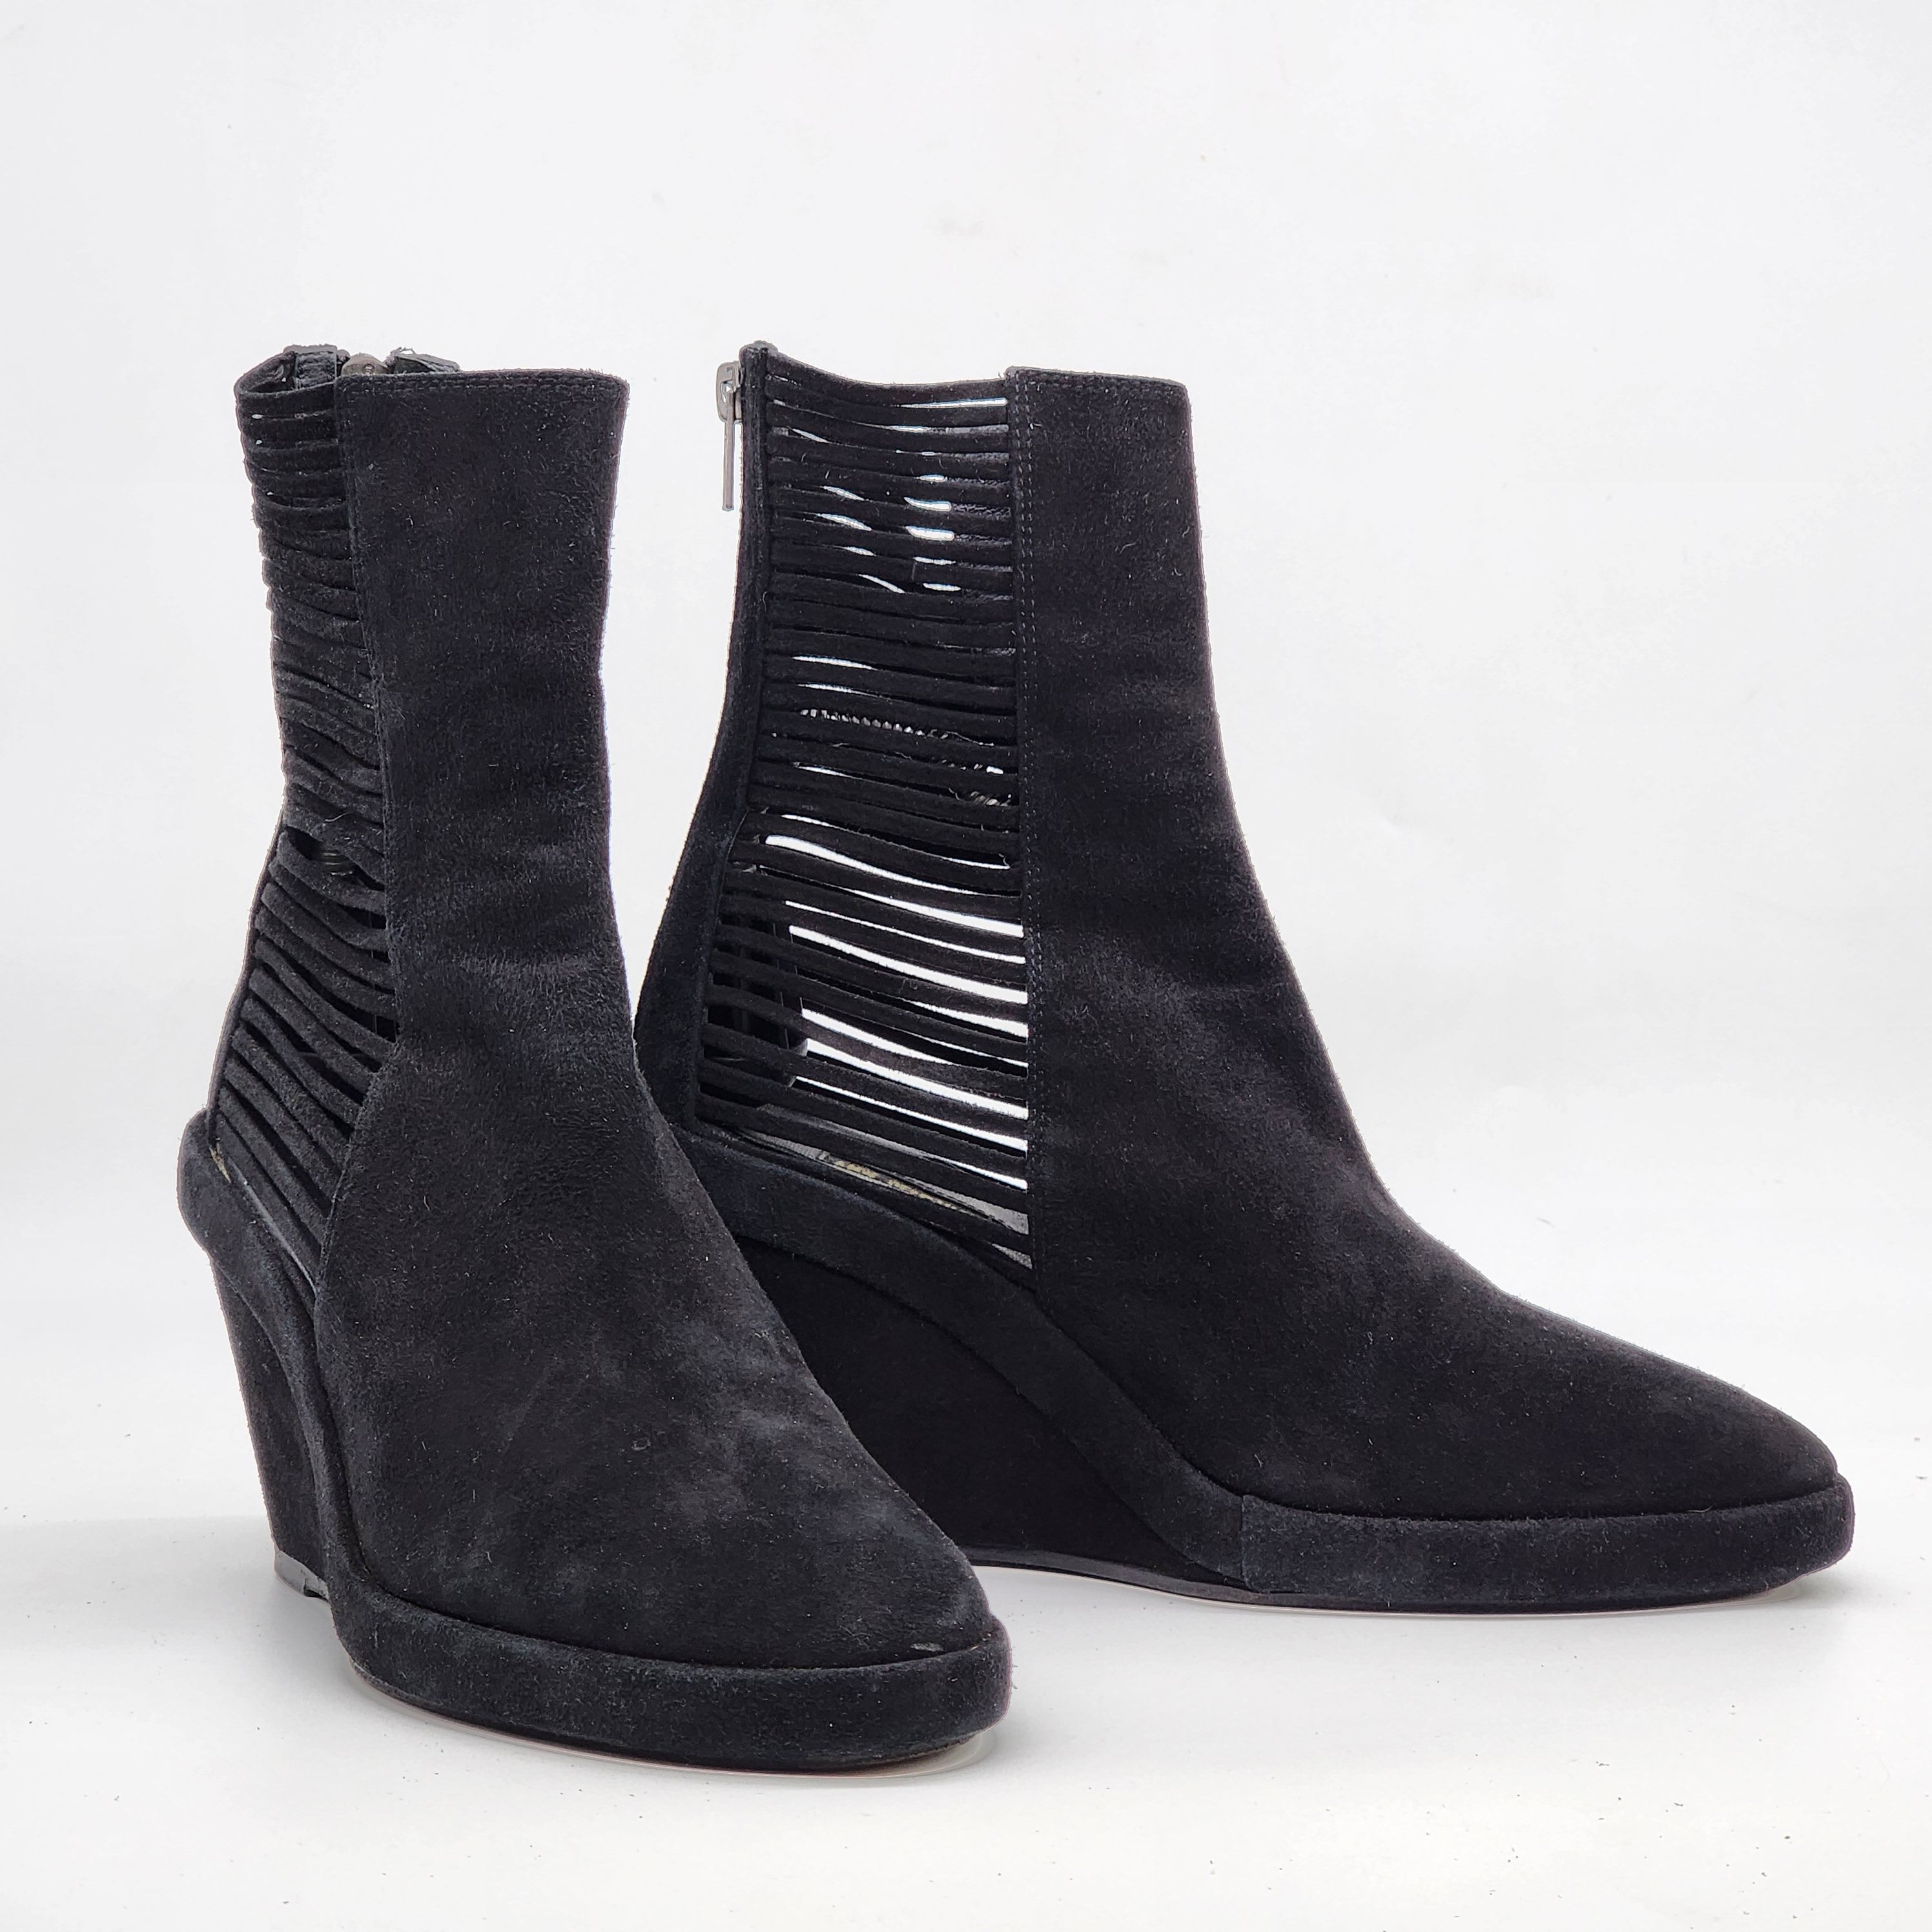 Ann Demeulemeester - Black Suede Slatted Wedge Boots - 2